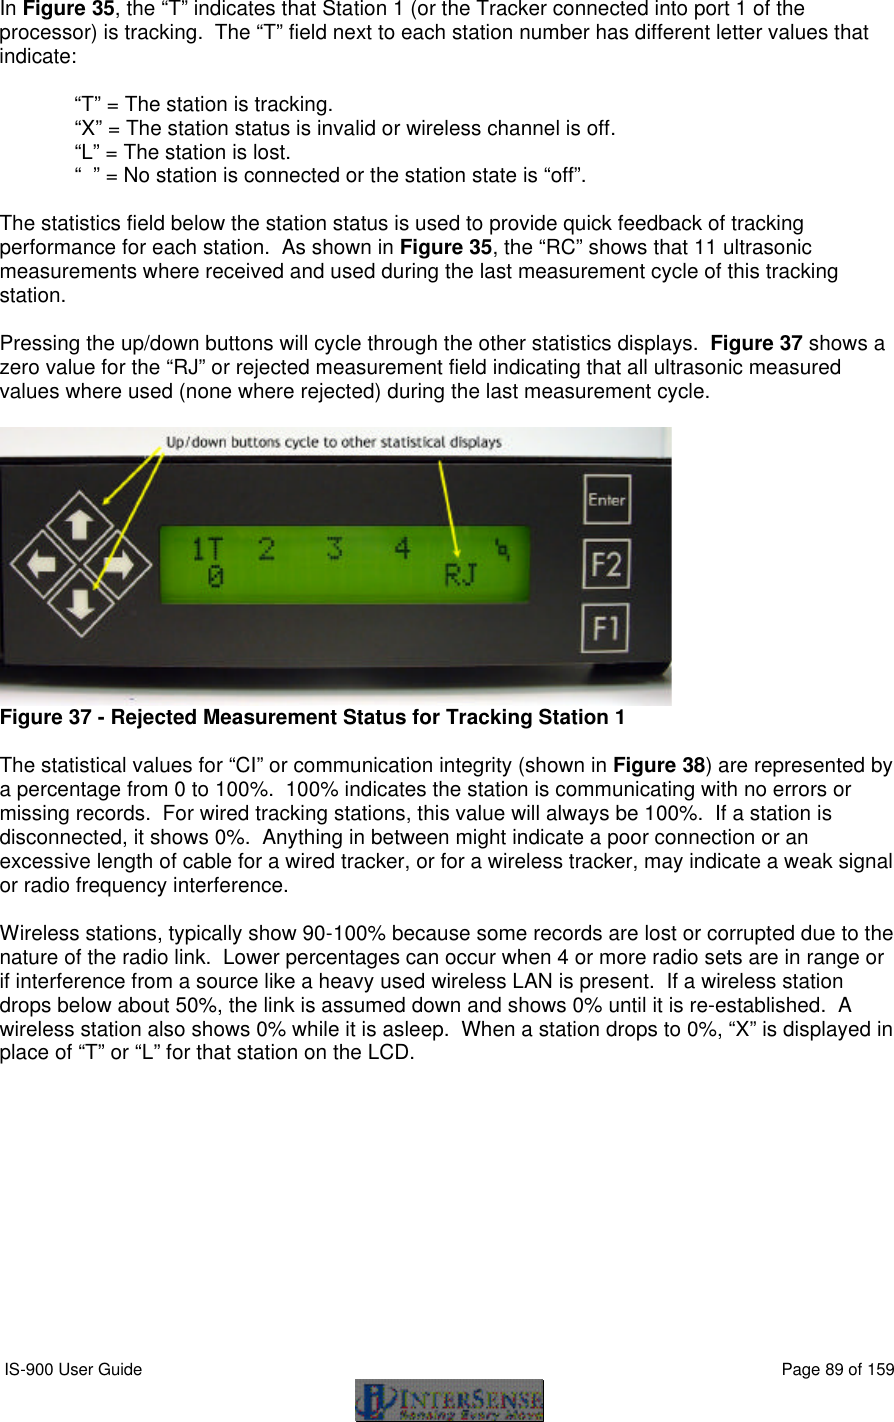  IS-900 User Guide                                                                                                                                          Page 89 of 159  In Figure 35, the “T” indicates that Station 1 (or the Tracker connected into port 1 of the processor) is tracking.  The “T” field next to each station number has different letter values that indicate:  “T” = The station is tracking. “X” = The station status is invalid or wireless channel is off. “L” = The station is lost. “  ” = No station is connected or the station state is “off”.  The statistics field below the station status is used to provide quick feedback of tracking performance for each station.  As shown in Figure 35, the “RC” shows that 11 ultrasonic measurements where received and used during the last measurement cycle of this tracking station.  Pressing the up/down buttons will cycle through the other statistics displays.  Figure 37 shows a zero value for the “RJ” or rejected measurement field indicating that all ultrasonic measured values where used (none where rejected) during the last measurement cycle.   Figure 37 - Rejected Measurement Status for Tracking Station 1  The statistical values for “CI” or communication integrity (shown in Figure 38) are represented by a percentage from 0 to 100%.  100% indicates the station is communicating with no errors or missing records.  For wired tracking stations, this value will always be 100%.  If a station is disconnected, it shows 0%.  Anything in between might indicate a poor connection or an excessive length of cable for a wired tracker, or for a wireless tracker, may indicate a weak signal or radio frequency interference.    Wireless stations, typically show 90-100% because some records are lost or corrupted due to the nature of the radio link.  Lower percentages can occur when 4 or more radio sets are in range or if interference from a source like a heavy used wireless LAN is present.  If a wireless station drops below about 50%, the link is assumed down and shows 0% until it is re-established.  A wireless station also shows 0% while it is asleep.  When a station drops to 0%, “X” is displayed in place of “T” or “L” for that station on the LCD.  